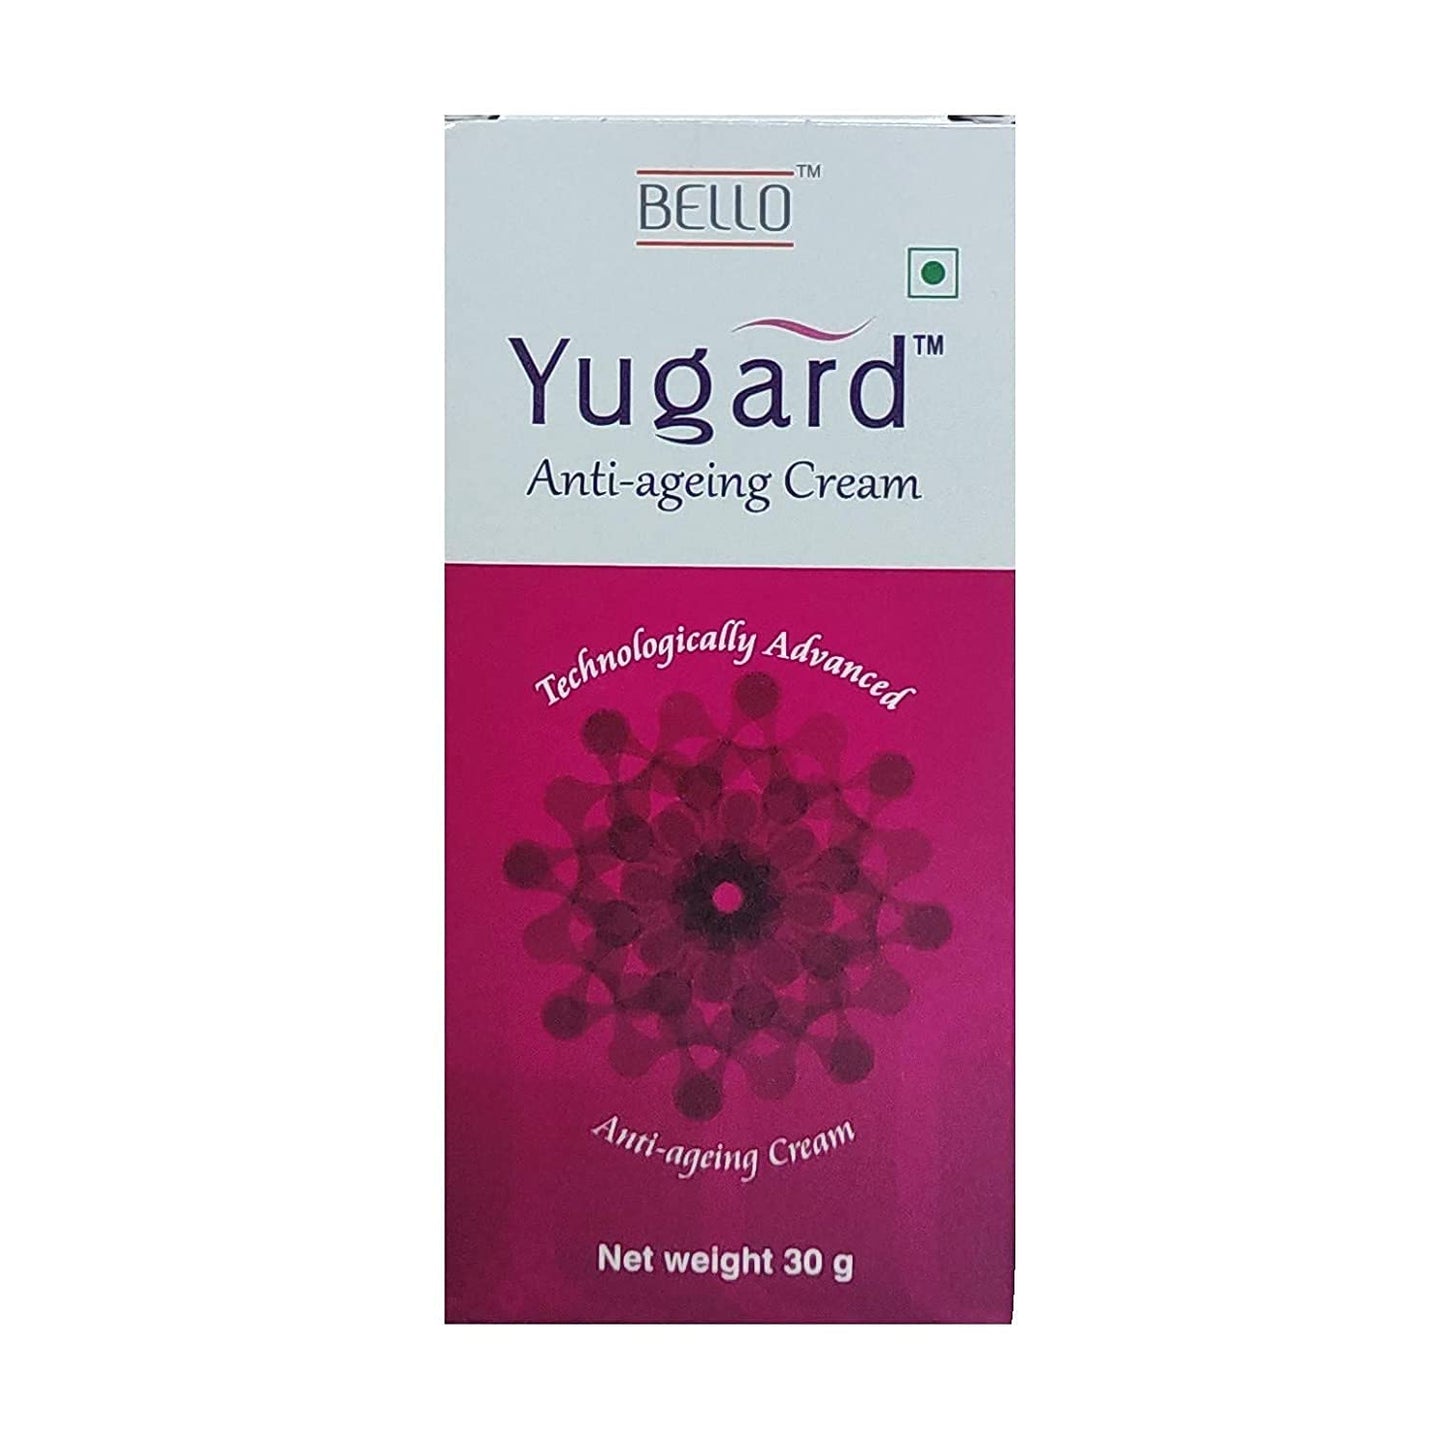 Yugard Anti-Ageing Cream contains Retinol, Retinol is a vitamin A Derivatives Retinol Works by Shedding upper dead Skin of the face and prevents Collagen Breakdown of skin to prevent facial Wrinkles Retinol also works on hyperpigmentation by removing dark cells and reducing Melanin Pigmentation